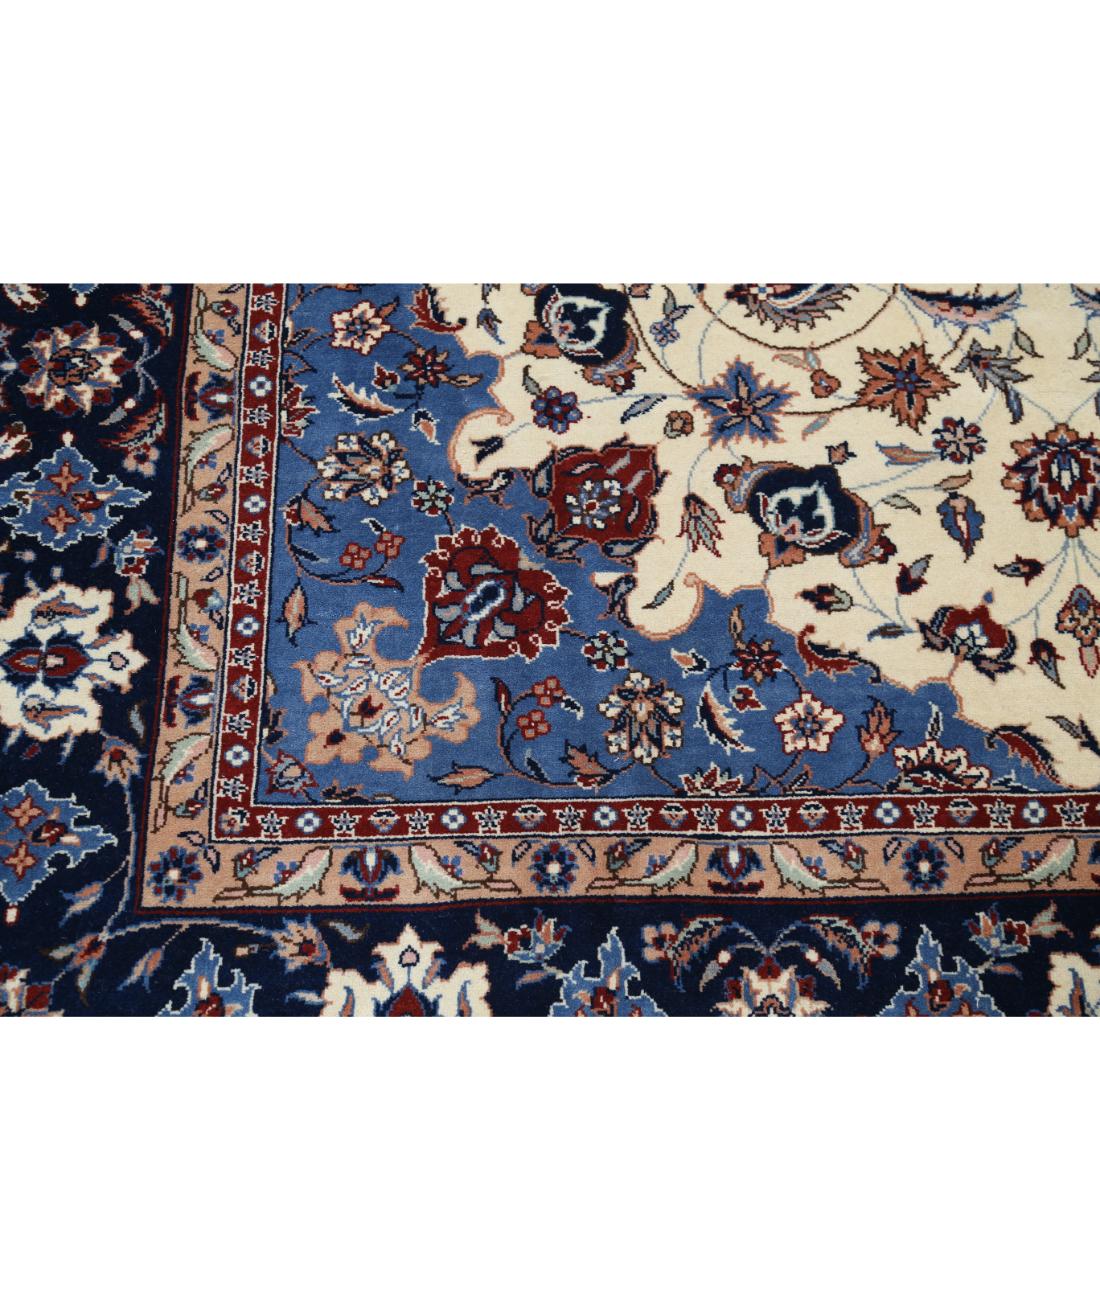 Heritage 6' 0" X 9' 0" Hand-Knotted Wool Rug 6' 0" X 9' 0" (183 X 274) / Ivory / Blue